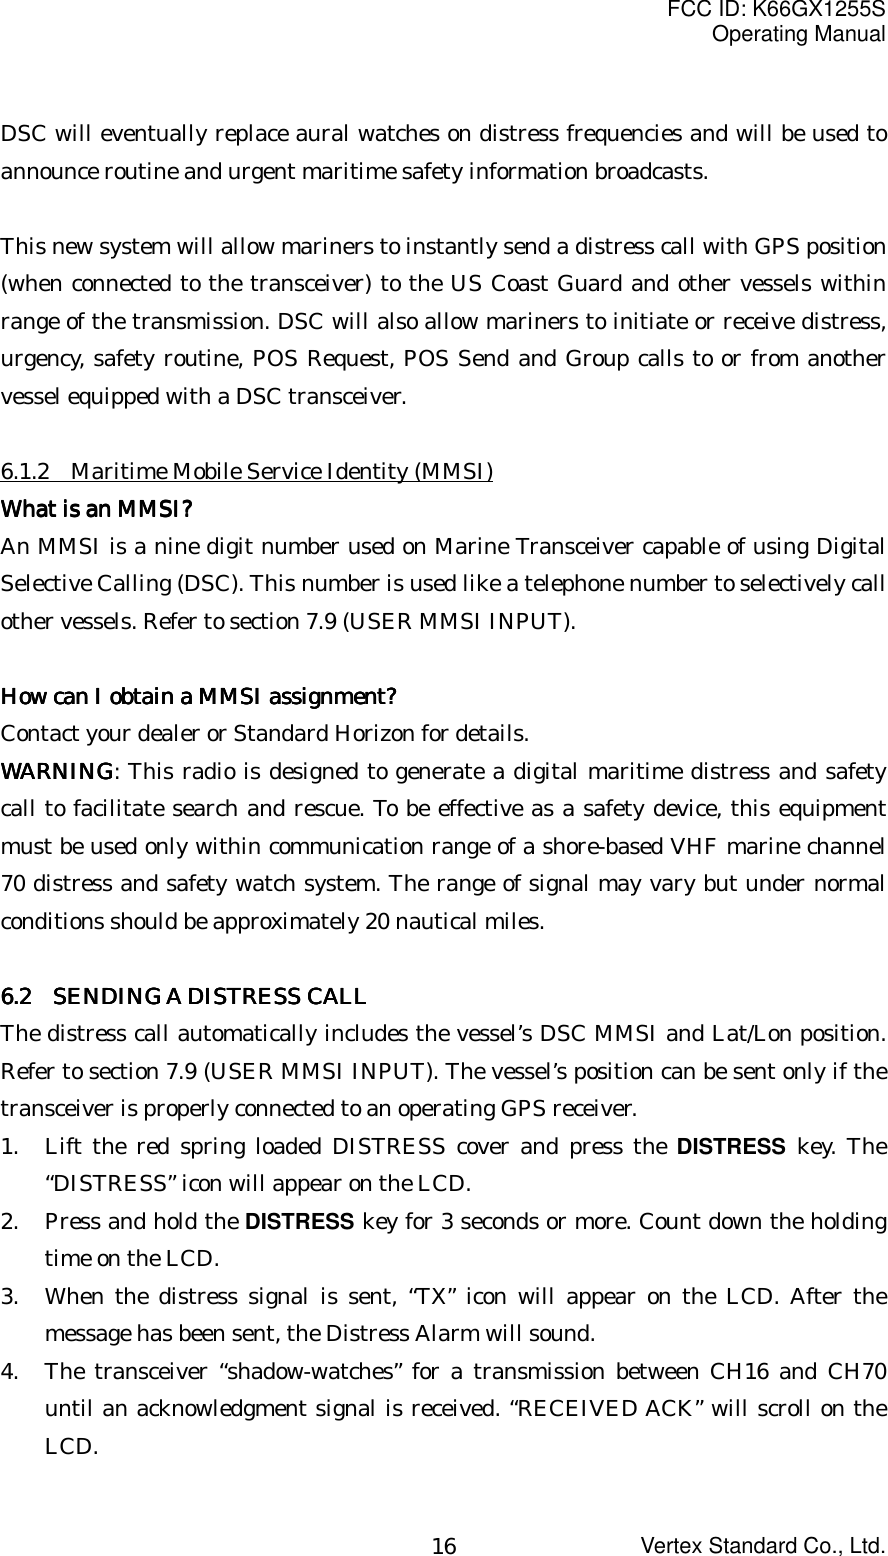 FCC ID: K66GX1255SOperating ManualVertex Standard Co., Ltd.16DSC will eventually replace aural watches on distress frequencies and will be used toannounce routine and urgent maritime safety information broadcasts.This new system will allow mariners to instantly send a distress call with GPS position(when connected to the transceiver) to the US Coast Guard and other vessels withinrange of the transmission. DSC will also allow mariners to initiate or receive distress,urgency, safety routine, POS Request, POS Send and Group calls to or from anothervessel equipped with a DSC transceiver.6.1.2    Maritime Mobile Service Identity (MMSI)What is an MMSI?What is an MMSI?What is an MMSI?What is an MMSI?An MMSI is a nine digit number used on Marine Transceiver capable of using DigitalSelective Calling (DSC). This number is used like a telephone number to selectively callother vessels. Refer to section 7.9 (USER MMSI INPUT).How can I obtain a MMSI assignment?How can I obtain a MMSI assignment?How can I obtain a MMSI assignment?How can I obtain a MMSI assignment?Contact your dealer or Standard Horizon for details.WARNINGWARNINGWARNINGWARNING: This radio is designed to generate a digital maritime distress and safetycall to facilitate search and rescue. To be effective as a safety device, this equipmentmust be used only within communication range of a shore-based VHF marine channel70 distress and safety watch system. The range of signal may vary but under normalconditions should be approximately 20 nautical miles.6.2 6.2 6.2 6.2     SENDING A DISTRESS CALLSENDING A DISTRESS CALLSENDING A DISTRESS CALLSENDING A DISTRESS CALLThe distress call automatically includes the vessel’s DSC MMSI and Lat/Lon position.Refer to section 7.9 (USER MMSI INPUT). The vessel’s position can be sent only if thetransceiver is properly connected to an operating GPS receiver.1. Lift the red spring loaded DISTRESS cover and press the DISTRESS key. The“DISTRESS” icon will appear on the LCD.2. Press and hold the DISTRESS key for 3 seconds or more. Count down the holdingtime on the LCD.3. When the distress signal is sent, “TX” icon will appear on the LCD. After themessage has been sent, the Distress Alarm will sound.4. The transceiver “shadow-watches” for a transmission between CH16 and CH70until an acknowledgment signal is received. “RECEIVED ACK” will scroll on theLCD.